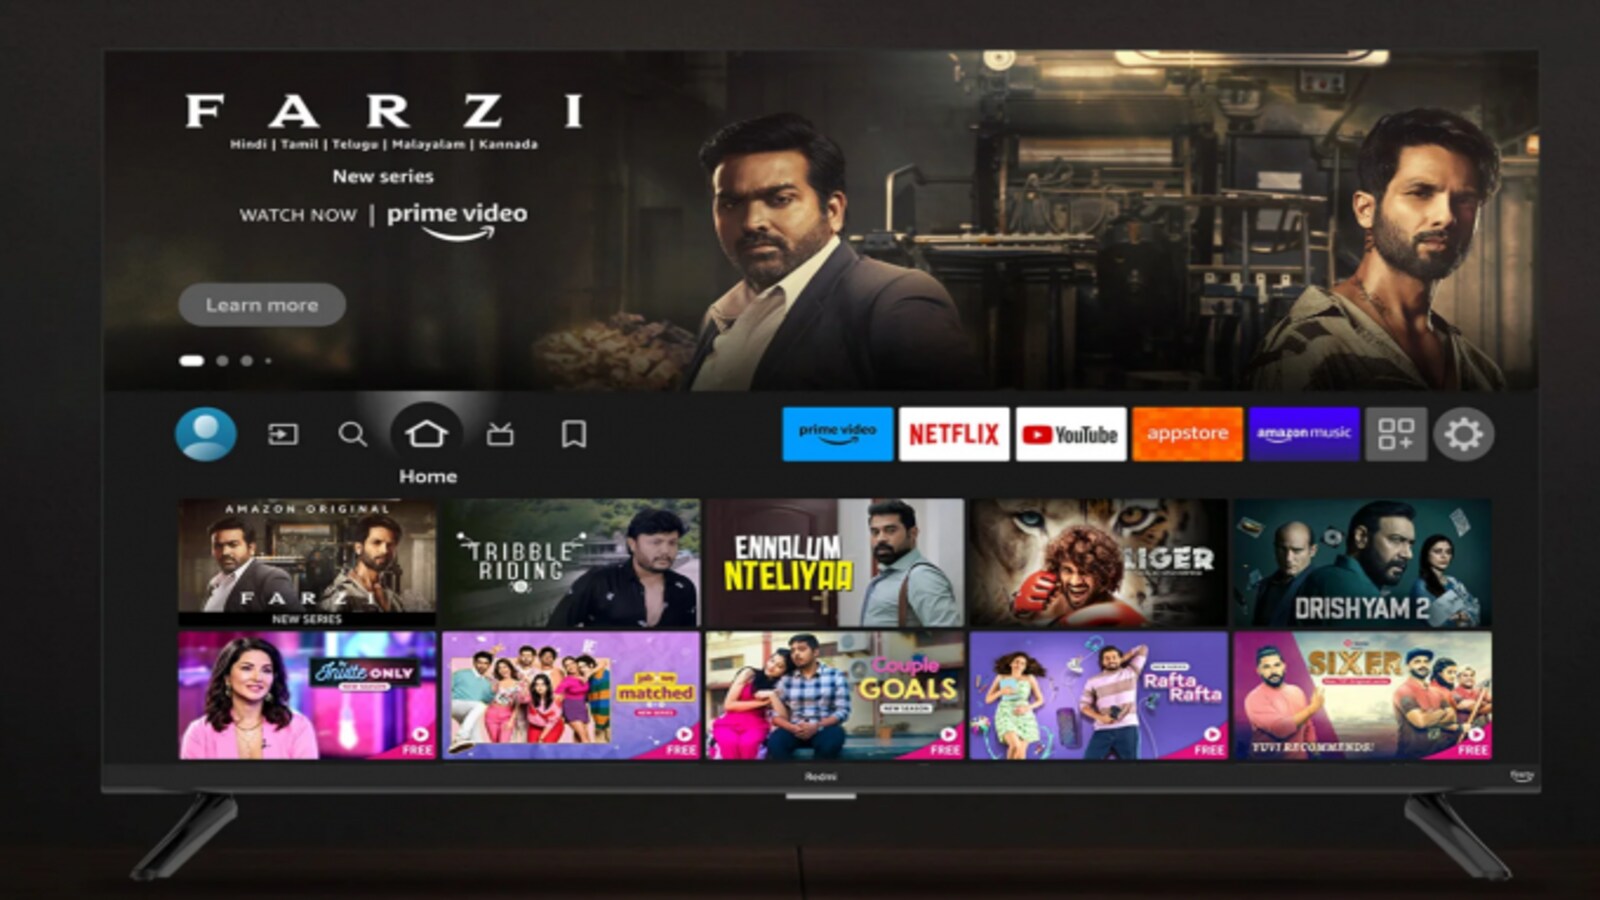 Indian customers spent nearly 4 hours daily on Fire TV devices in 2021